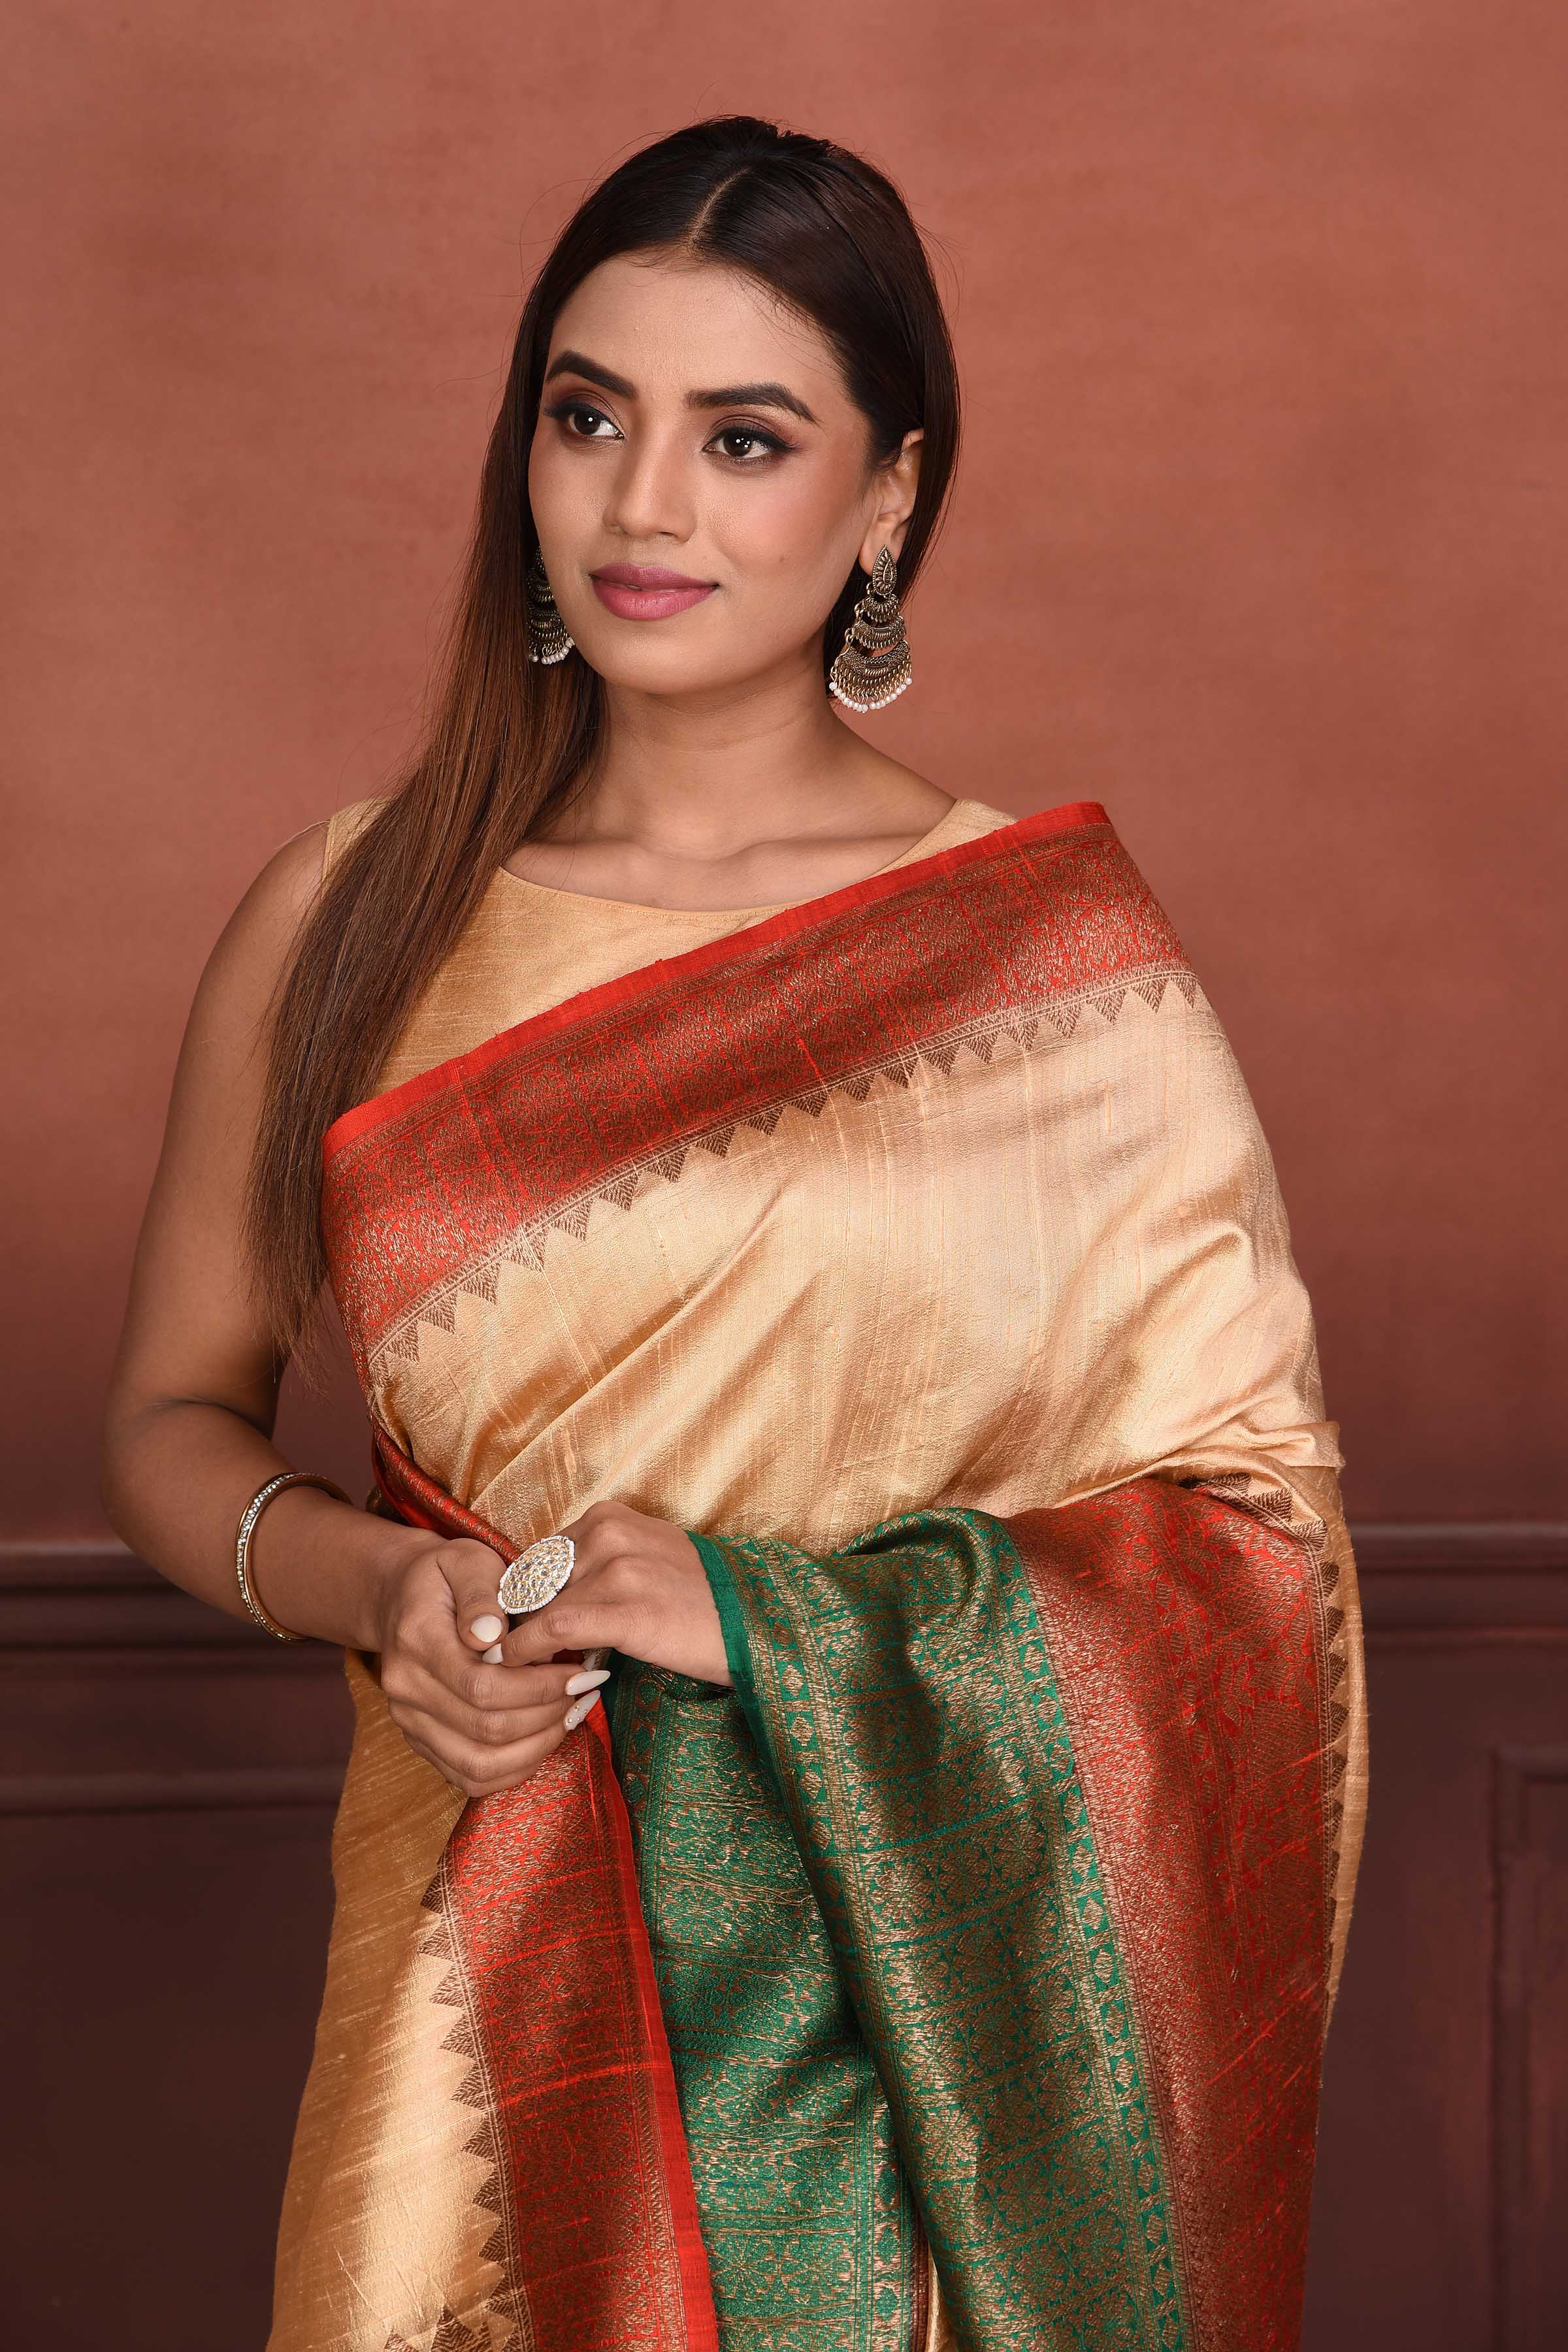 Buy cream tussar Banarasi saree online in USA with red green zari border. Look your best on festive occasions in latest designer sarees, pure silk sarees, Kanchipuram silk sarees, handwoven sarees, tussar silk sarees, embroidered sarees from Pure Elegance Indian clothing store in USA.-closeup